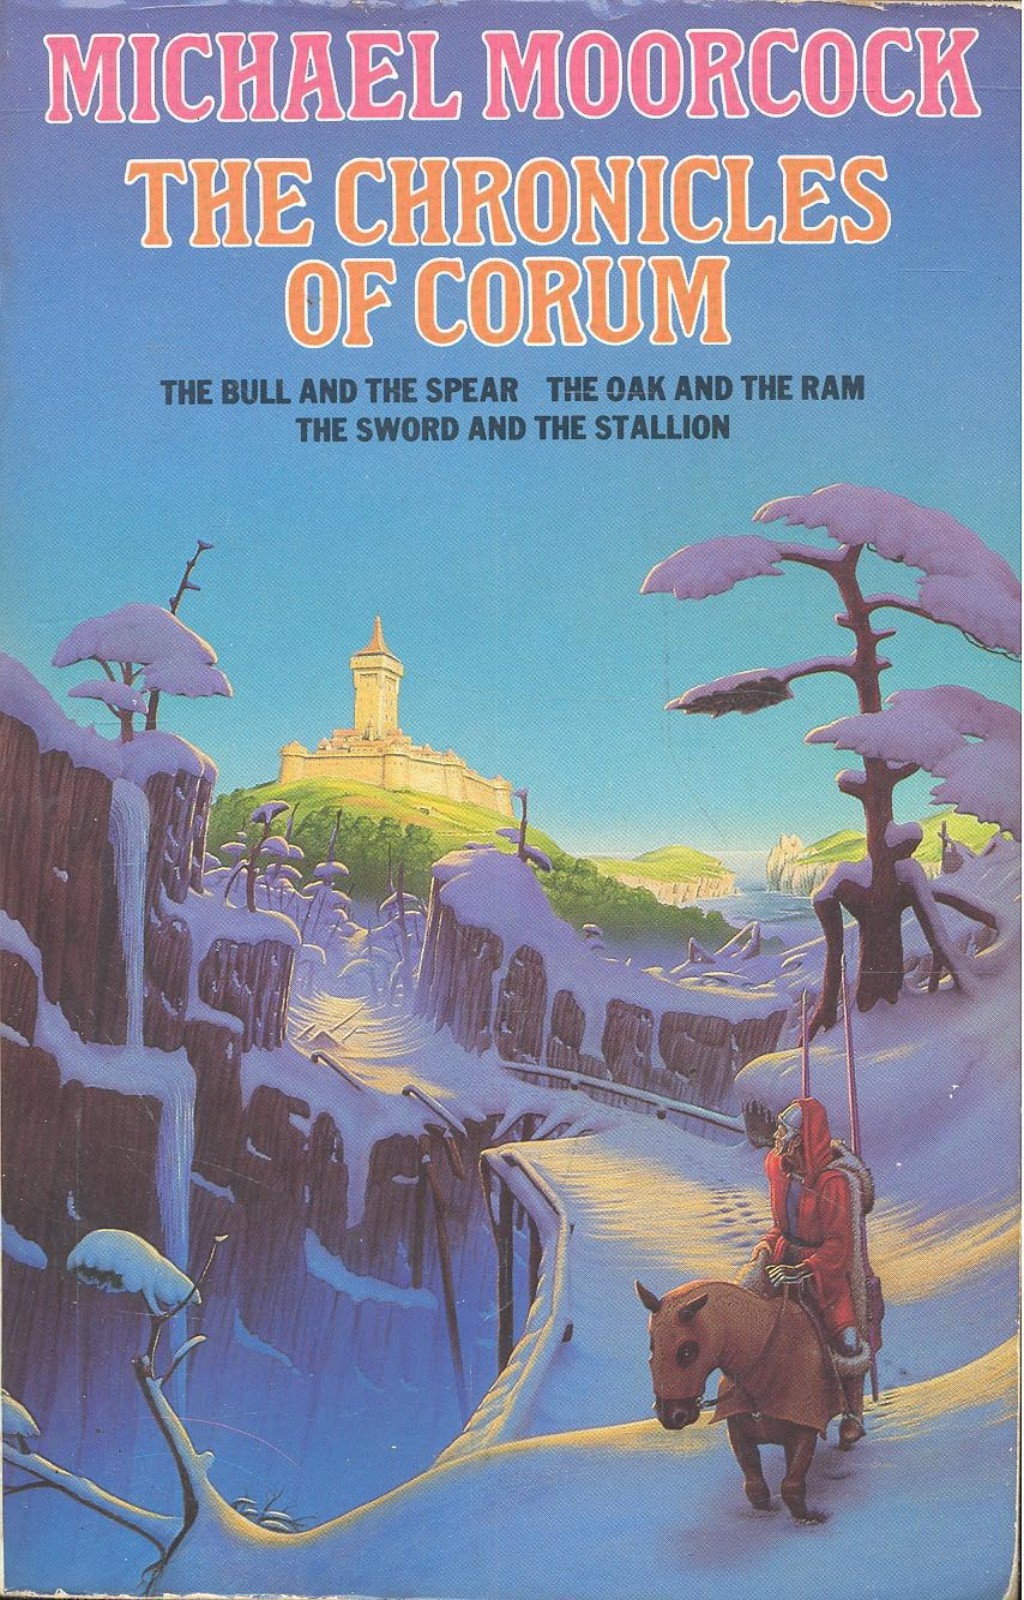 Chronicles of Corum by Michael Moorcock